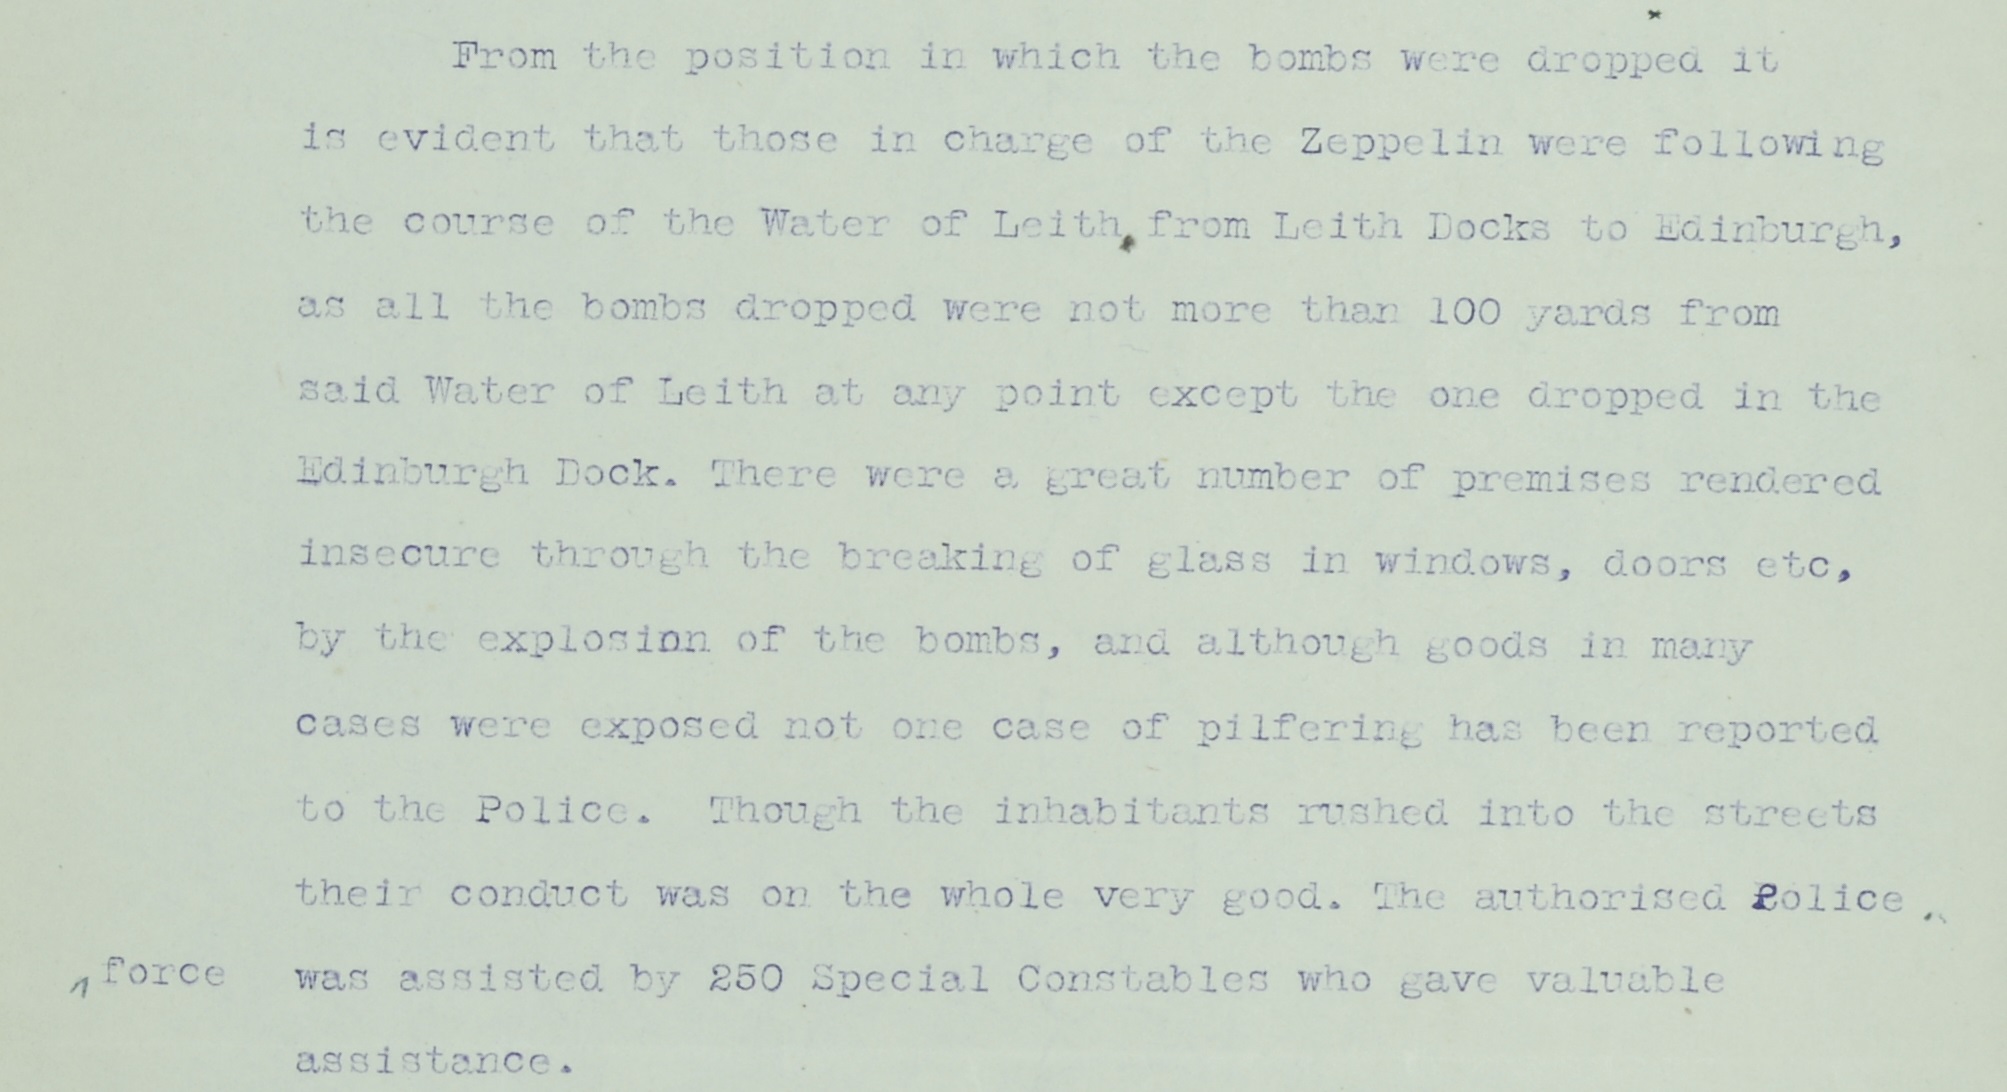 Image shows extract from the report on the raid compiled by the Chief Constable of Leith, 1916, National Records of Scotland, HH31/21/8 fol.17